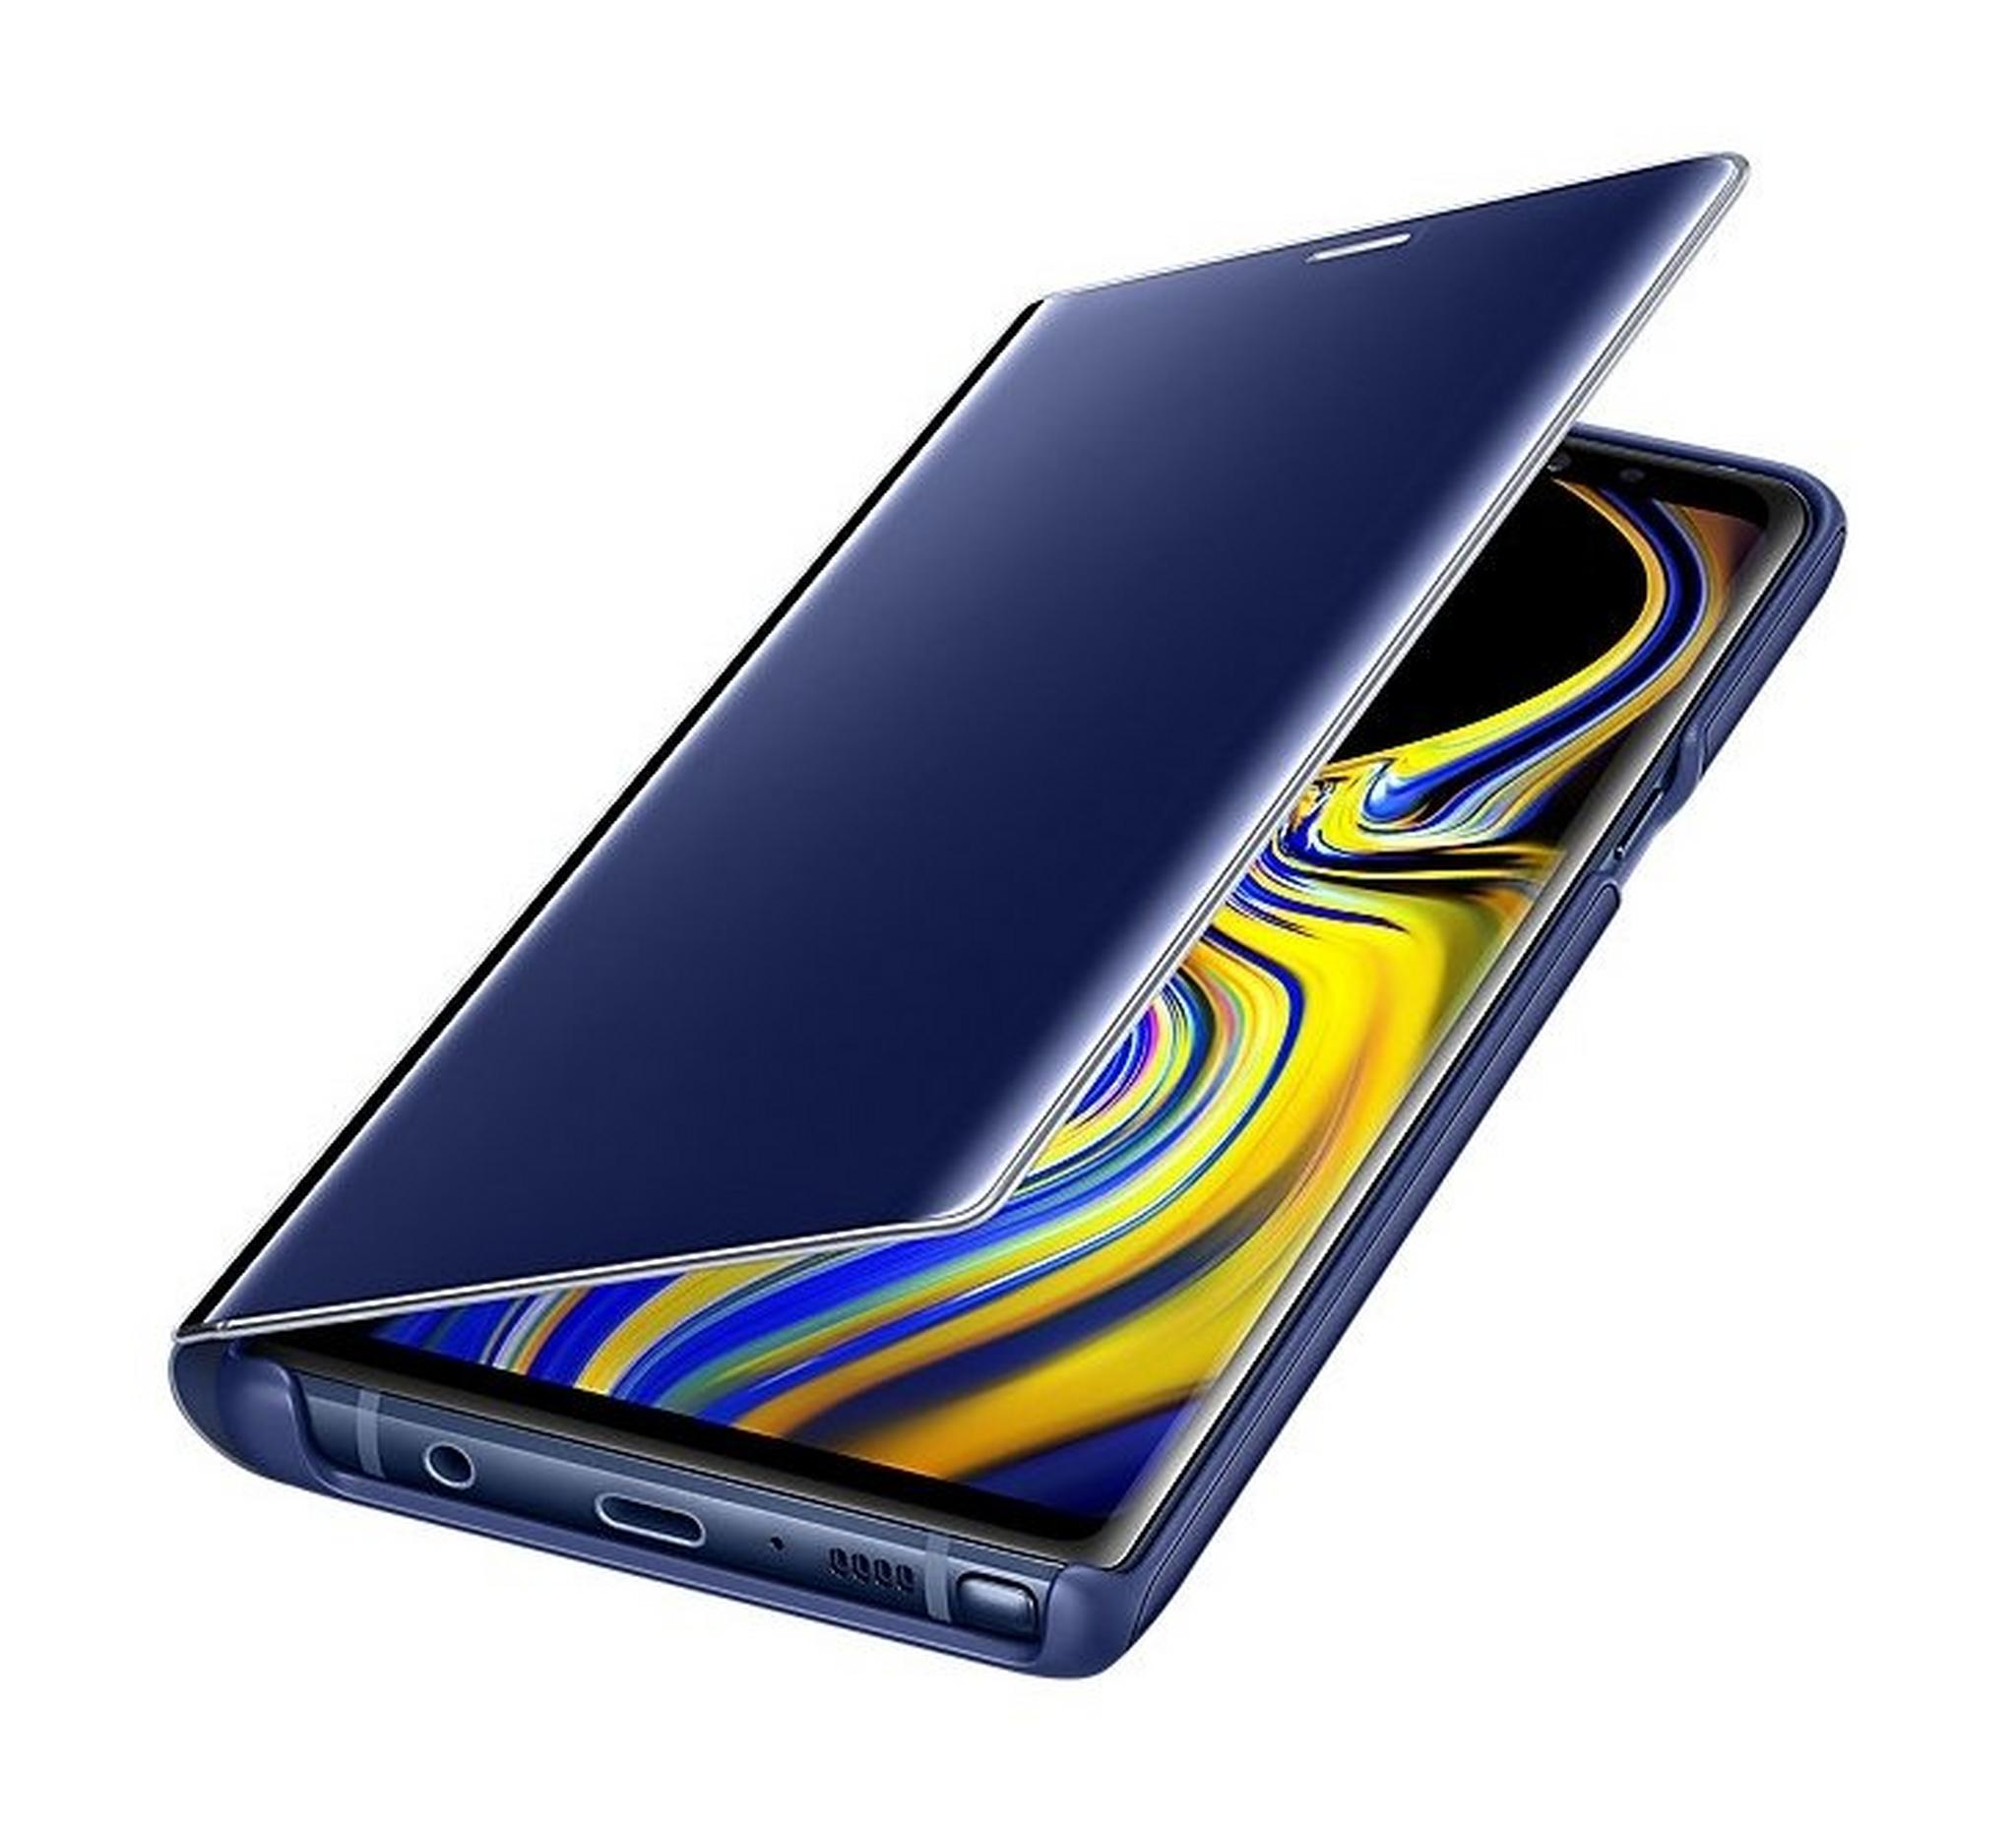 Samsung Galaxy Note9 Clear View Standing Cover (EF-ZN960CLEGWW) - Blue